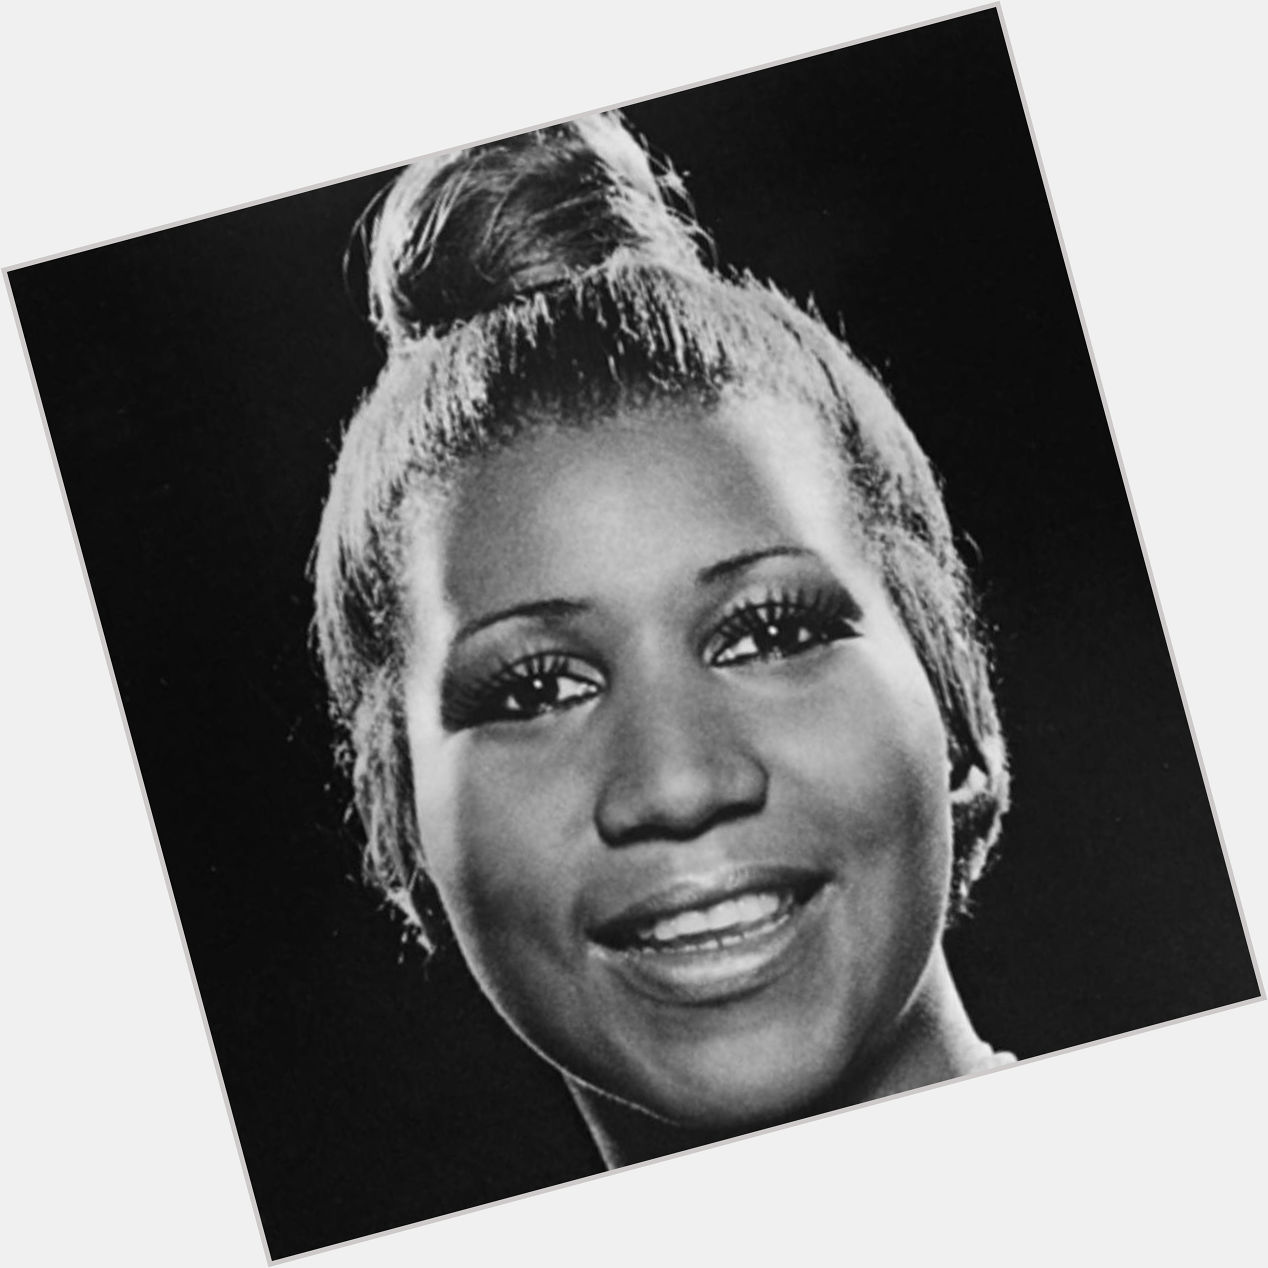 Happy 75th birthday to the Queen of Soul, Aretha Franklin!

Born in Memphis, Tennessee in 